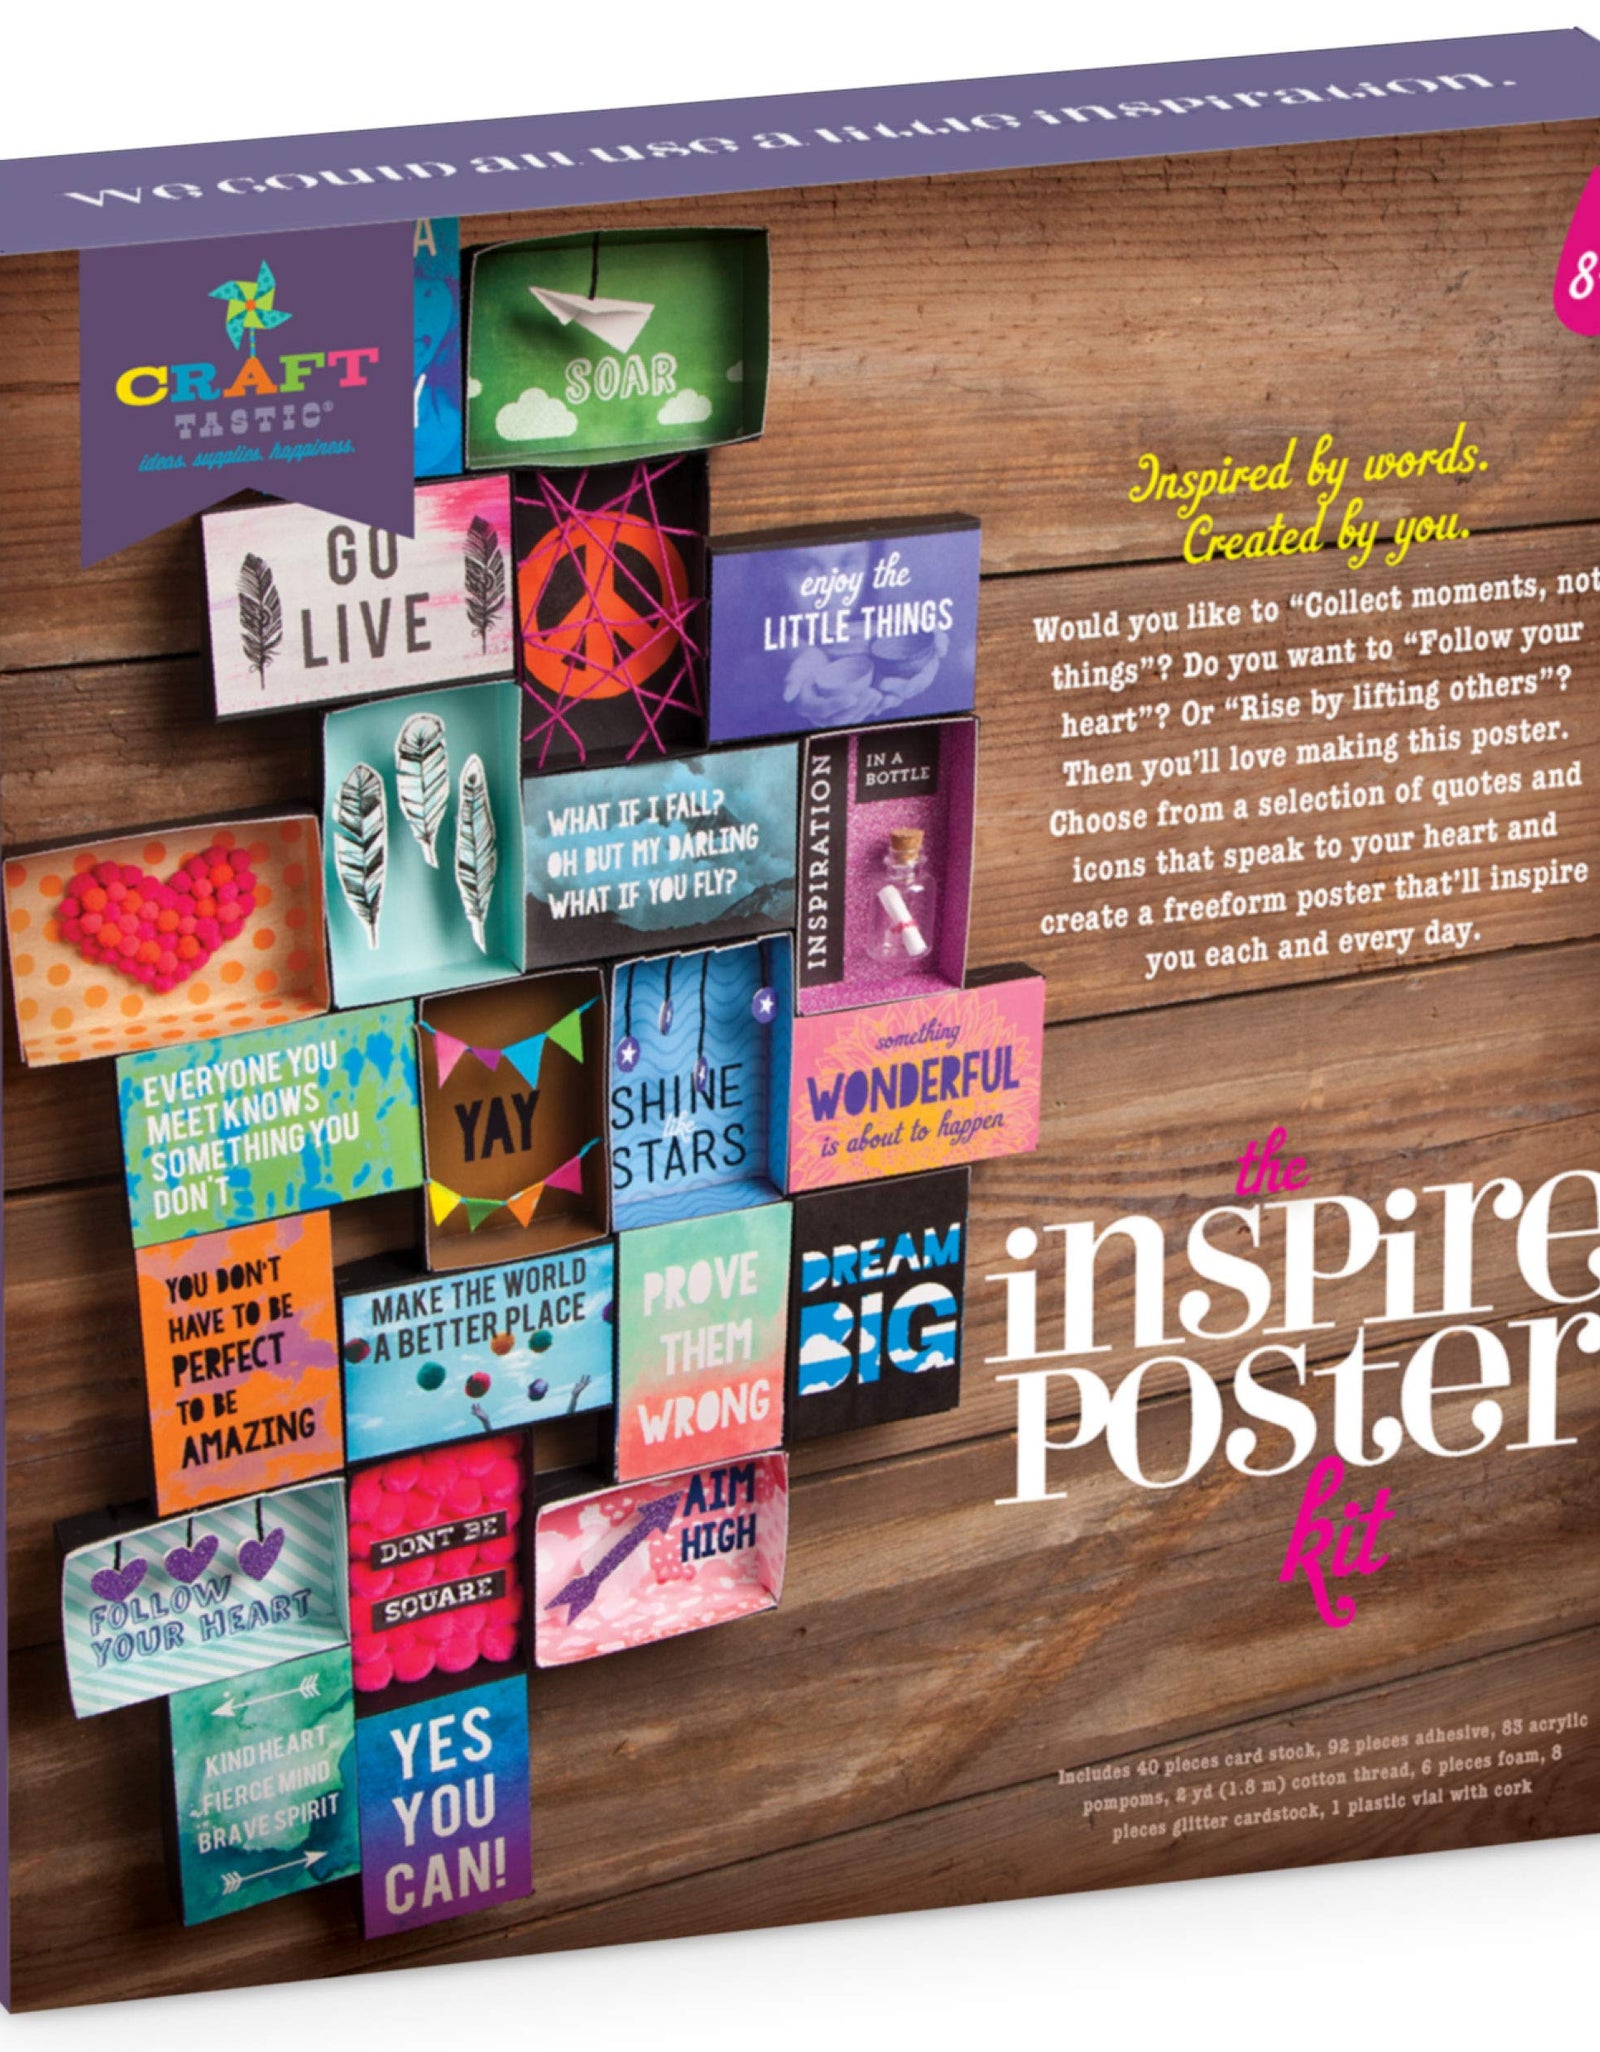 Craft-tastic – Inspire Poster Kit – Design a One-of-a-Kind Freeform Poster